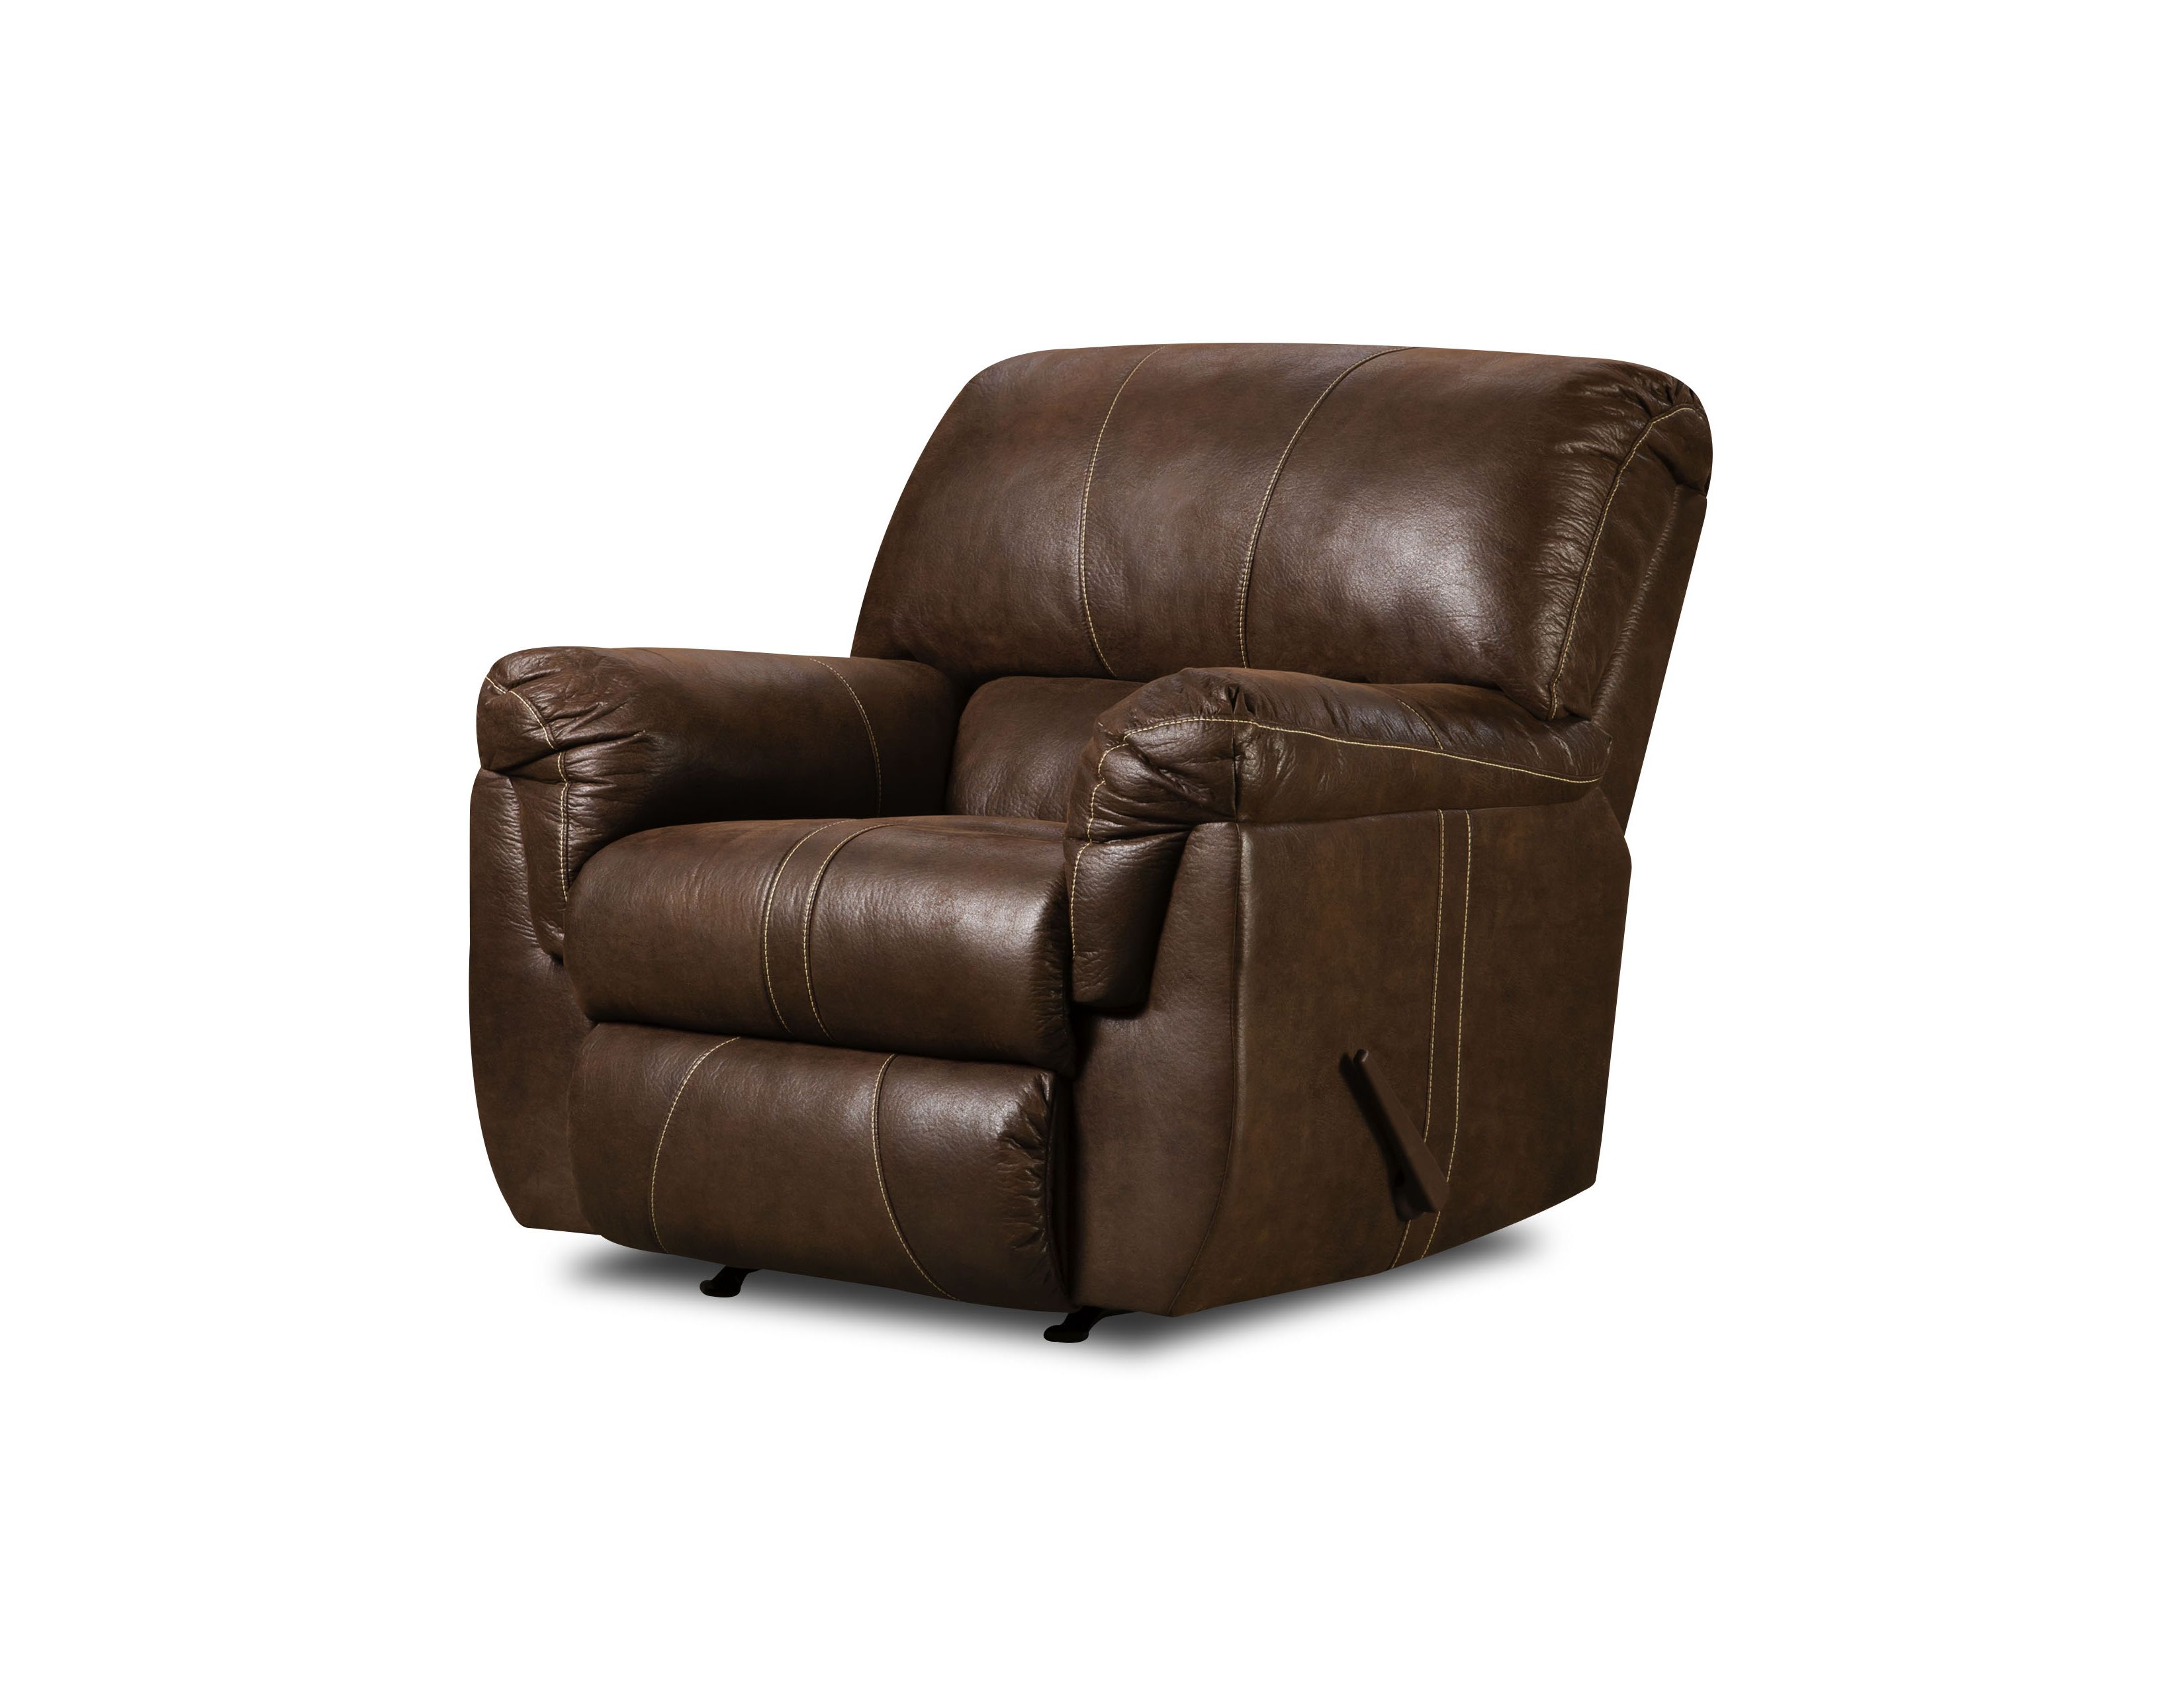 Rogan Leather Cafe Latte Swivel Glider Recliners For Preferred Furniture: Surprising Simmons Recliners For Contemporary Living Room (View 4 of 20)